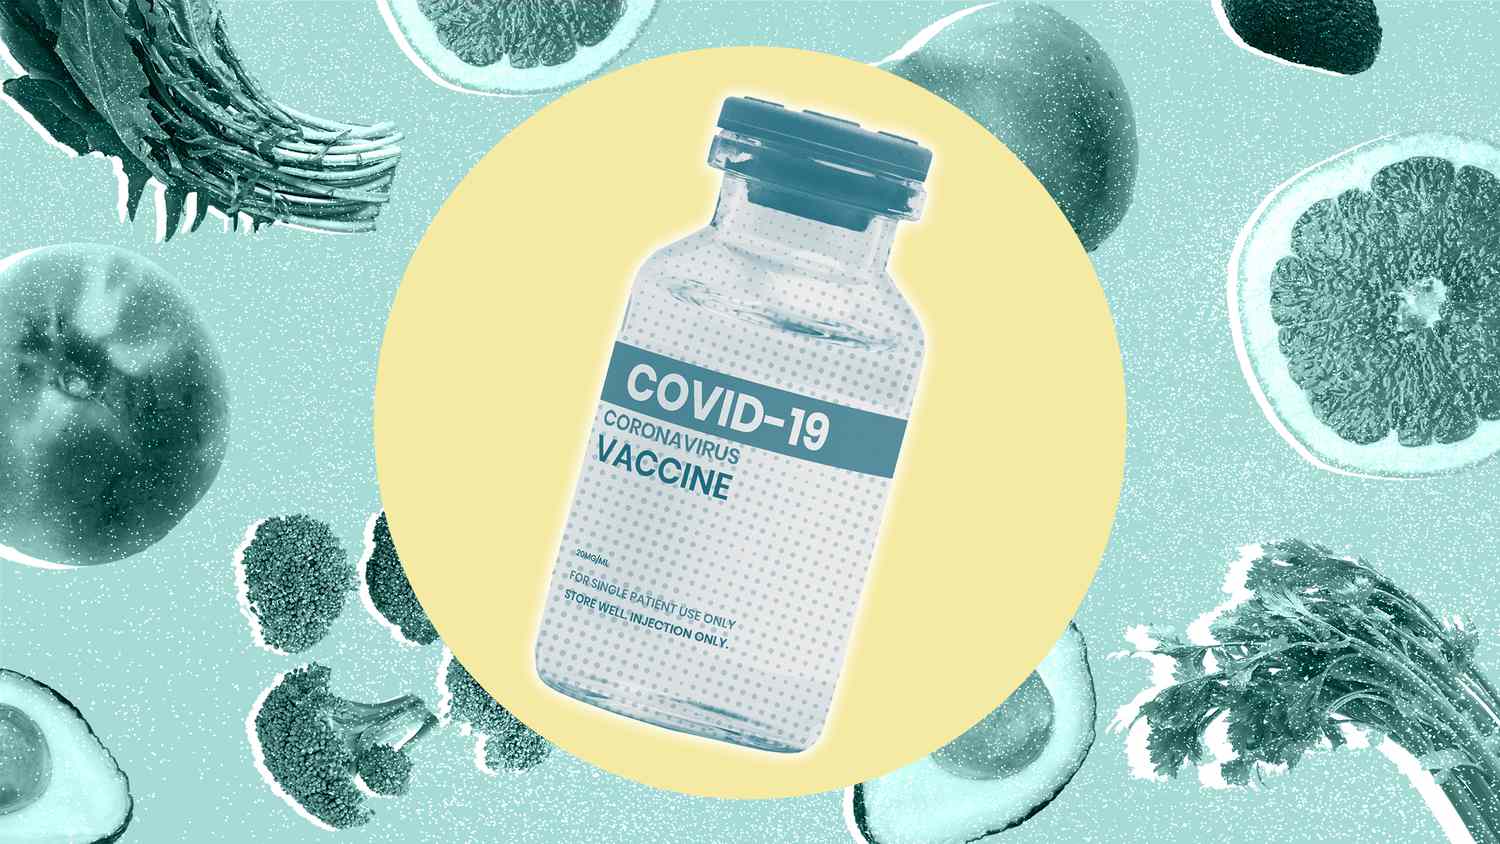 Covid-19 vaccine on a designed background with fruits and vegetables